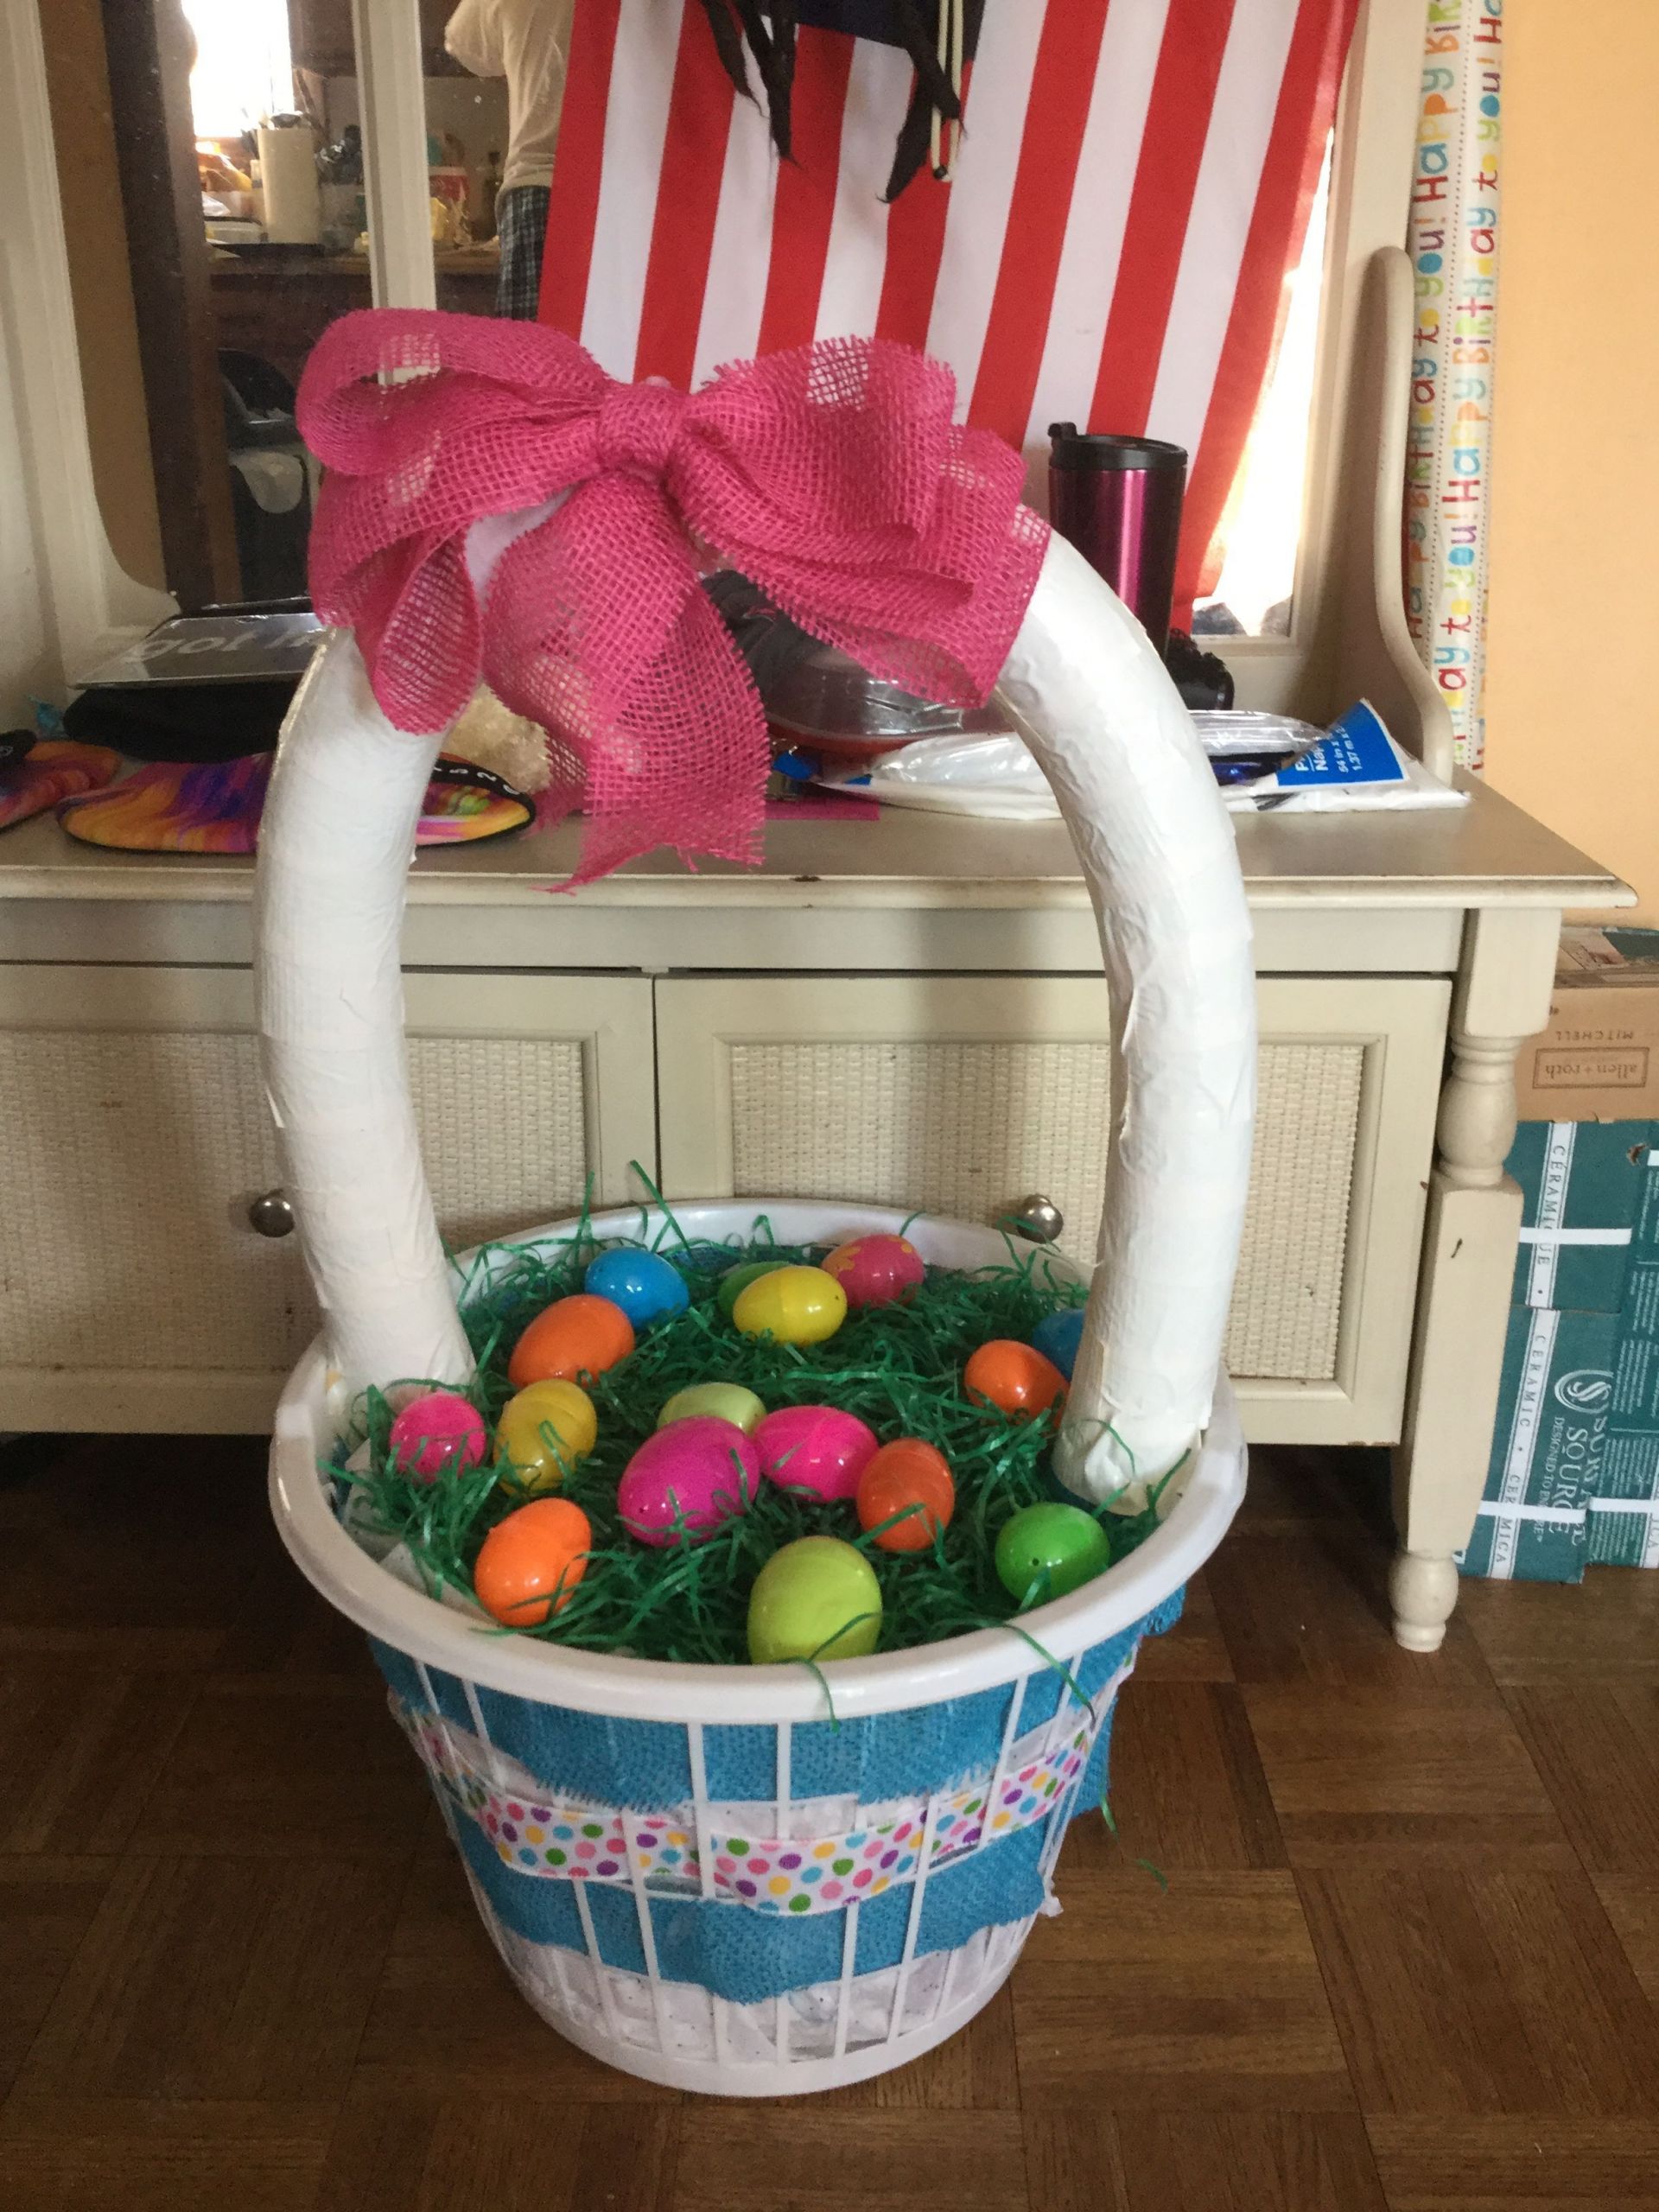 Diy Easter Basket
 I made an Easter basket out of a laundry basket and a pool